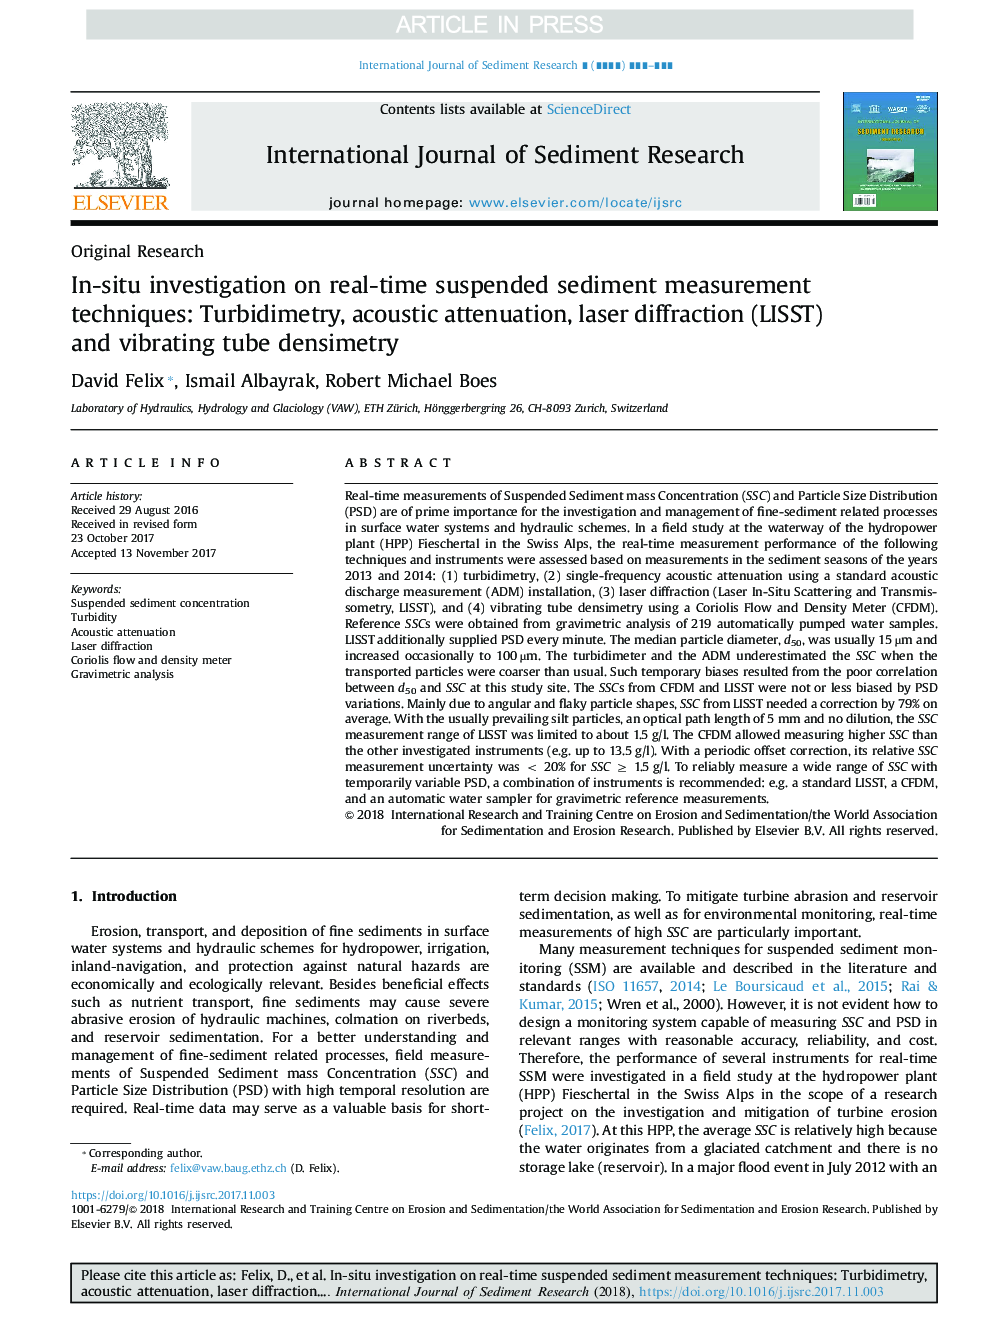 In-situ investigation on real-time suspended sediment measurement techniques: Turbidimetry, acoustic attenuation, laser diffraction (LISST) and vibrating tube densimetry